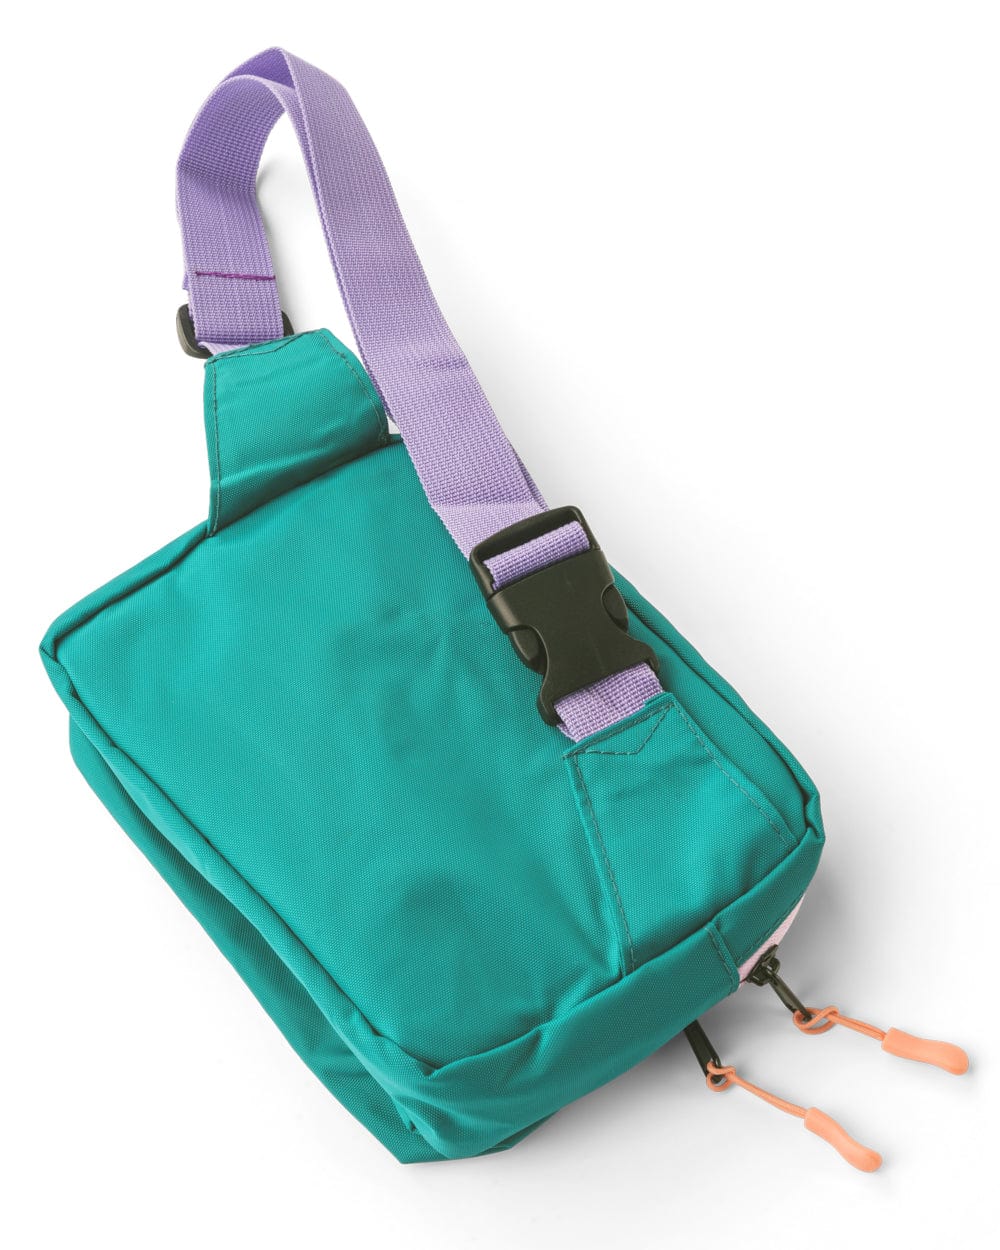 Keep Nature Wild Fanny Pack Adventure Fanny Pack | Teal/Lavender